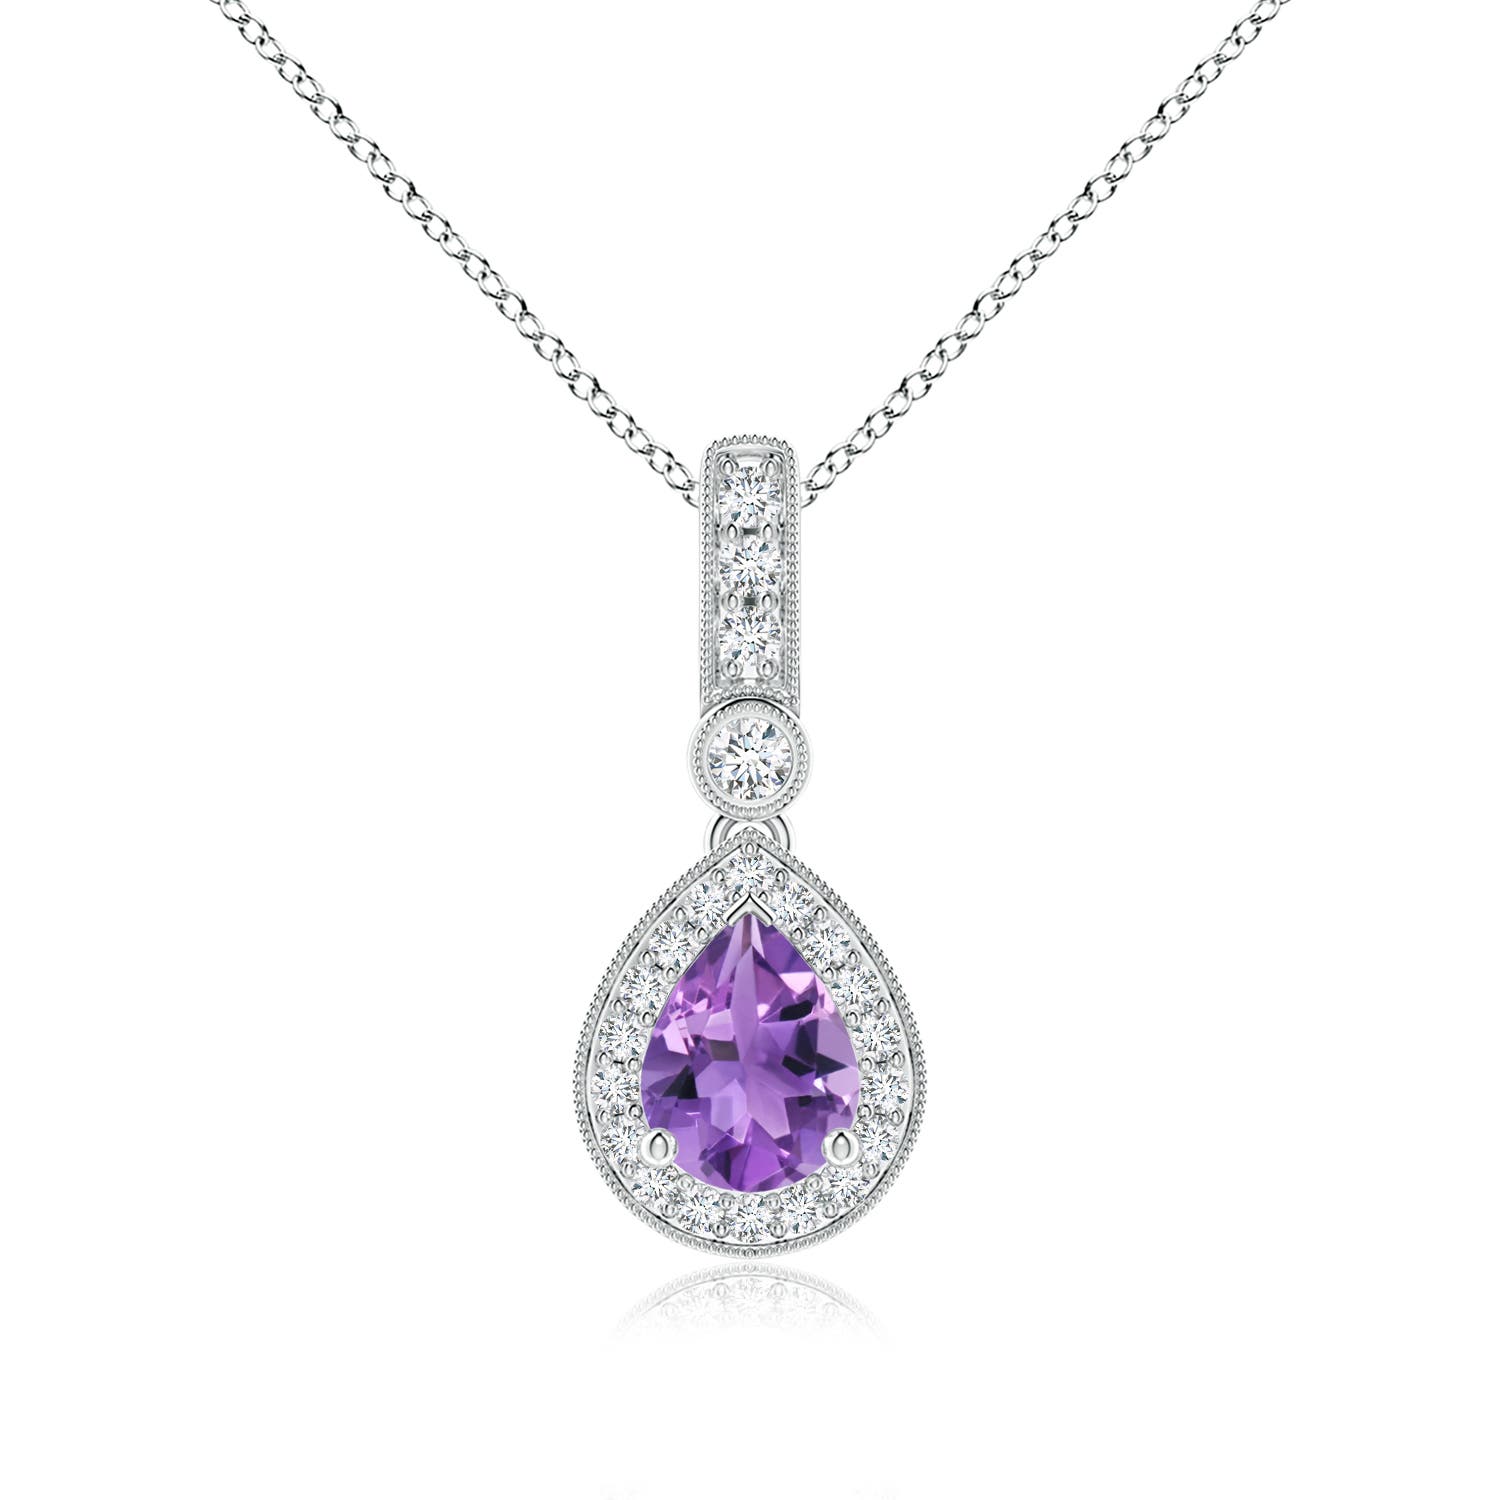 AA - Amethyst / 1.31 CT / 14 KT White Gold